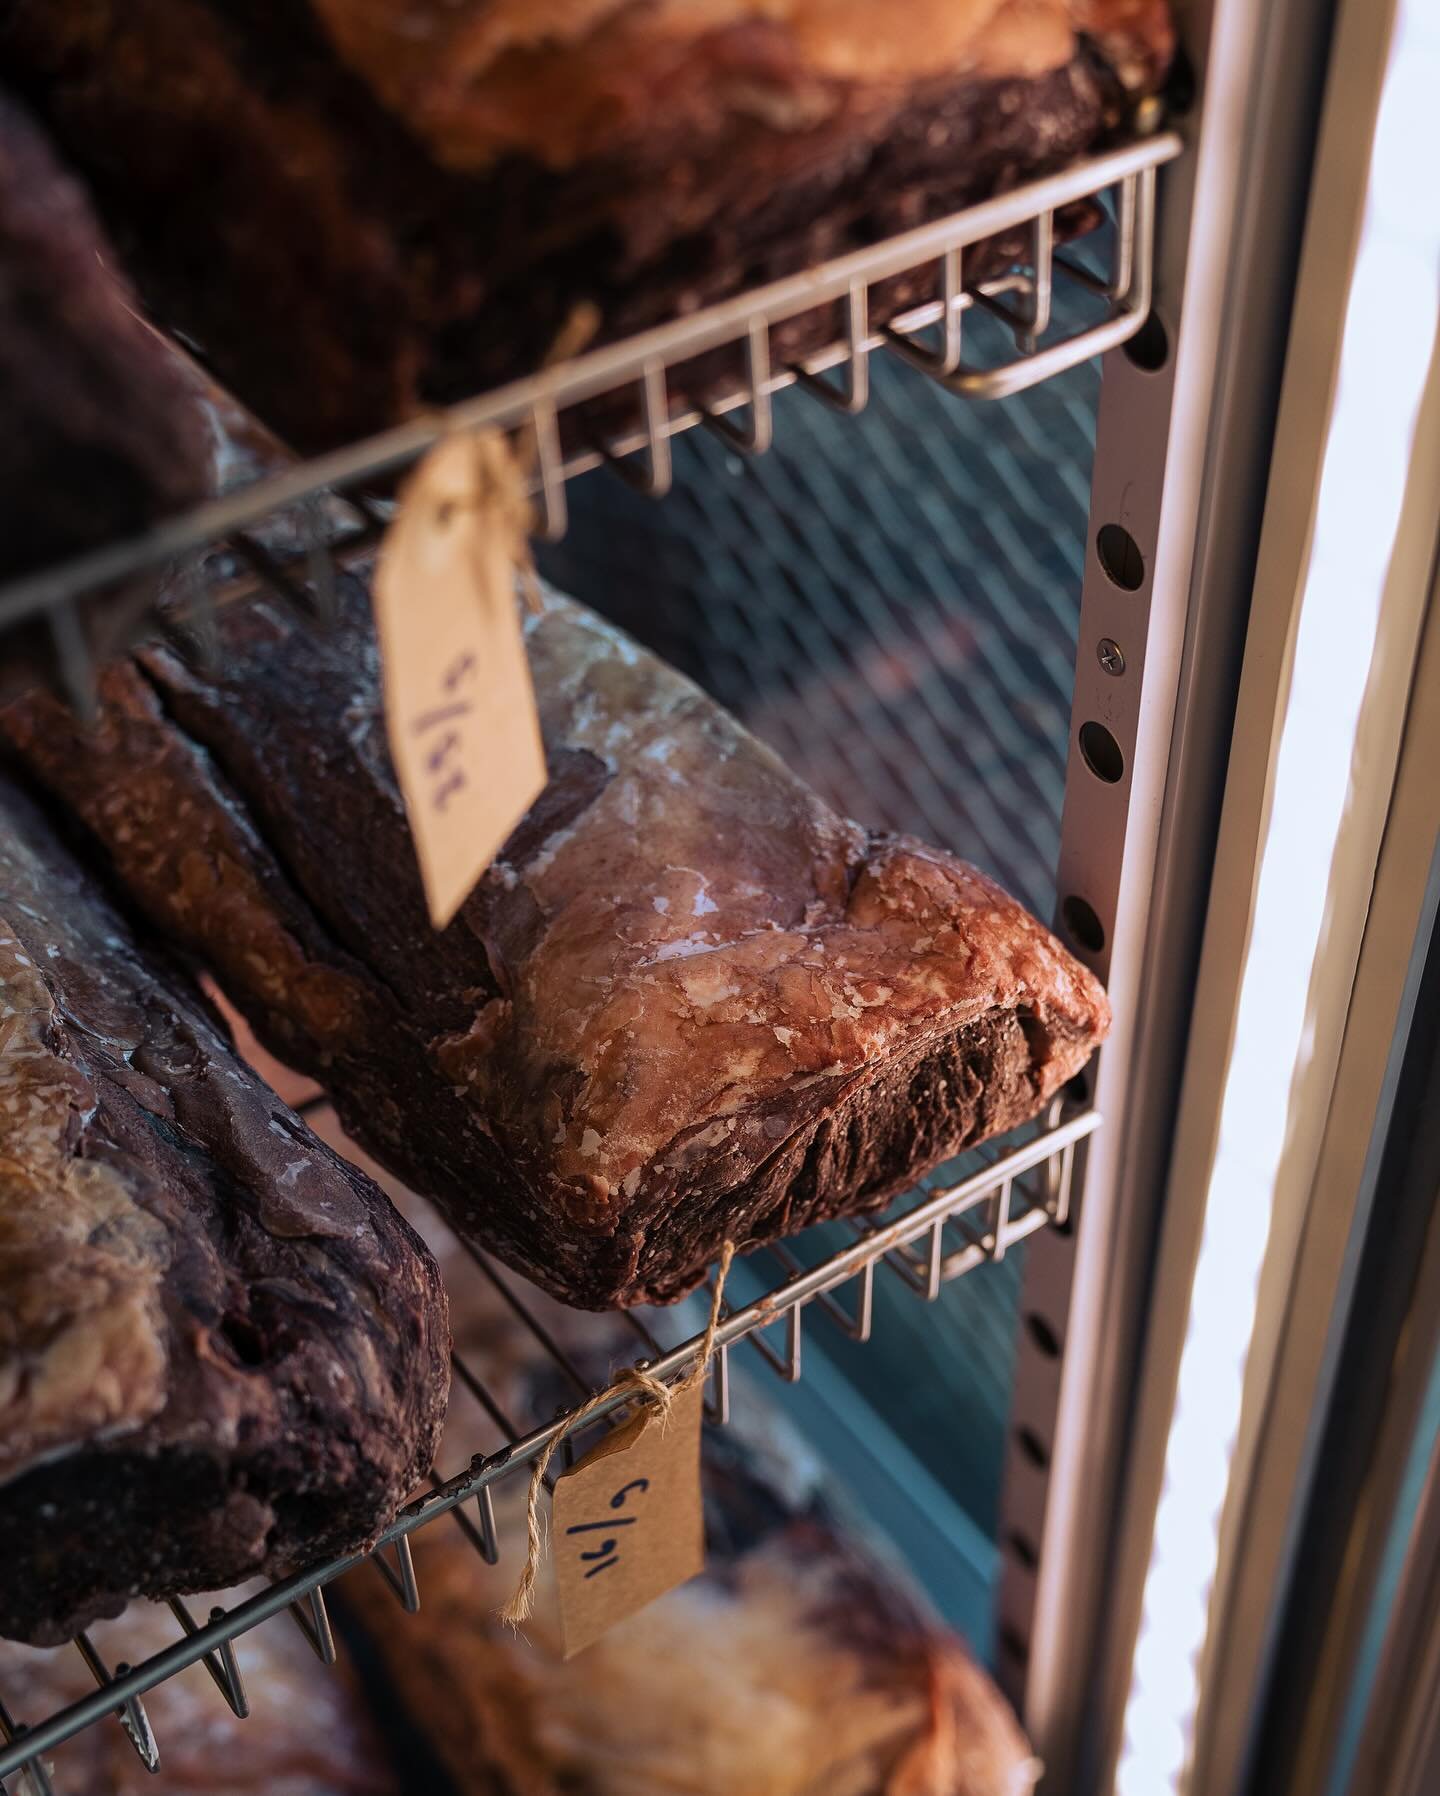 Age is just a number, especially when it comes to our steaks! 😉🥩 Our dry aging process transforms prime cuts into flavor-packed masterpieces, proving that maturity only enhances perfection 🤩

📸: @almar.vlot

#Confuego #Confuegobreda #Breda #Steak